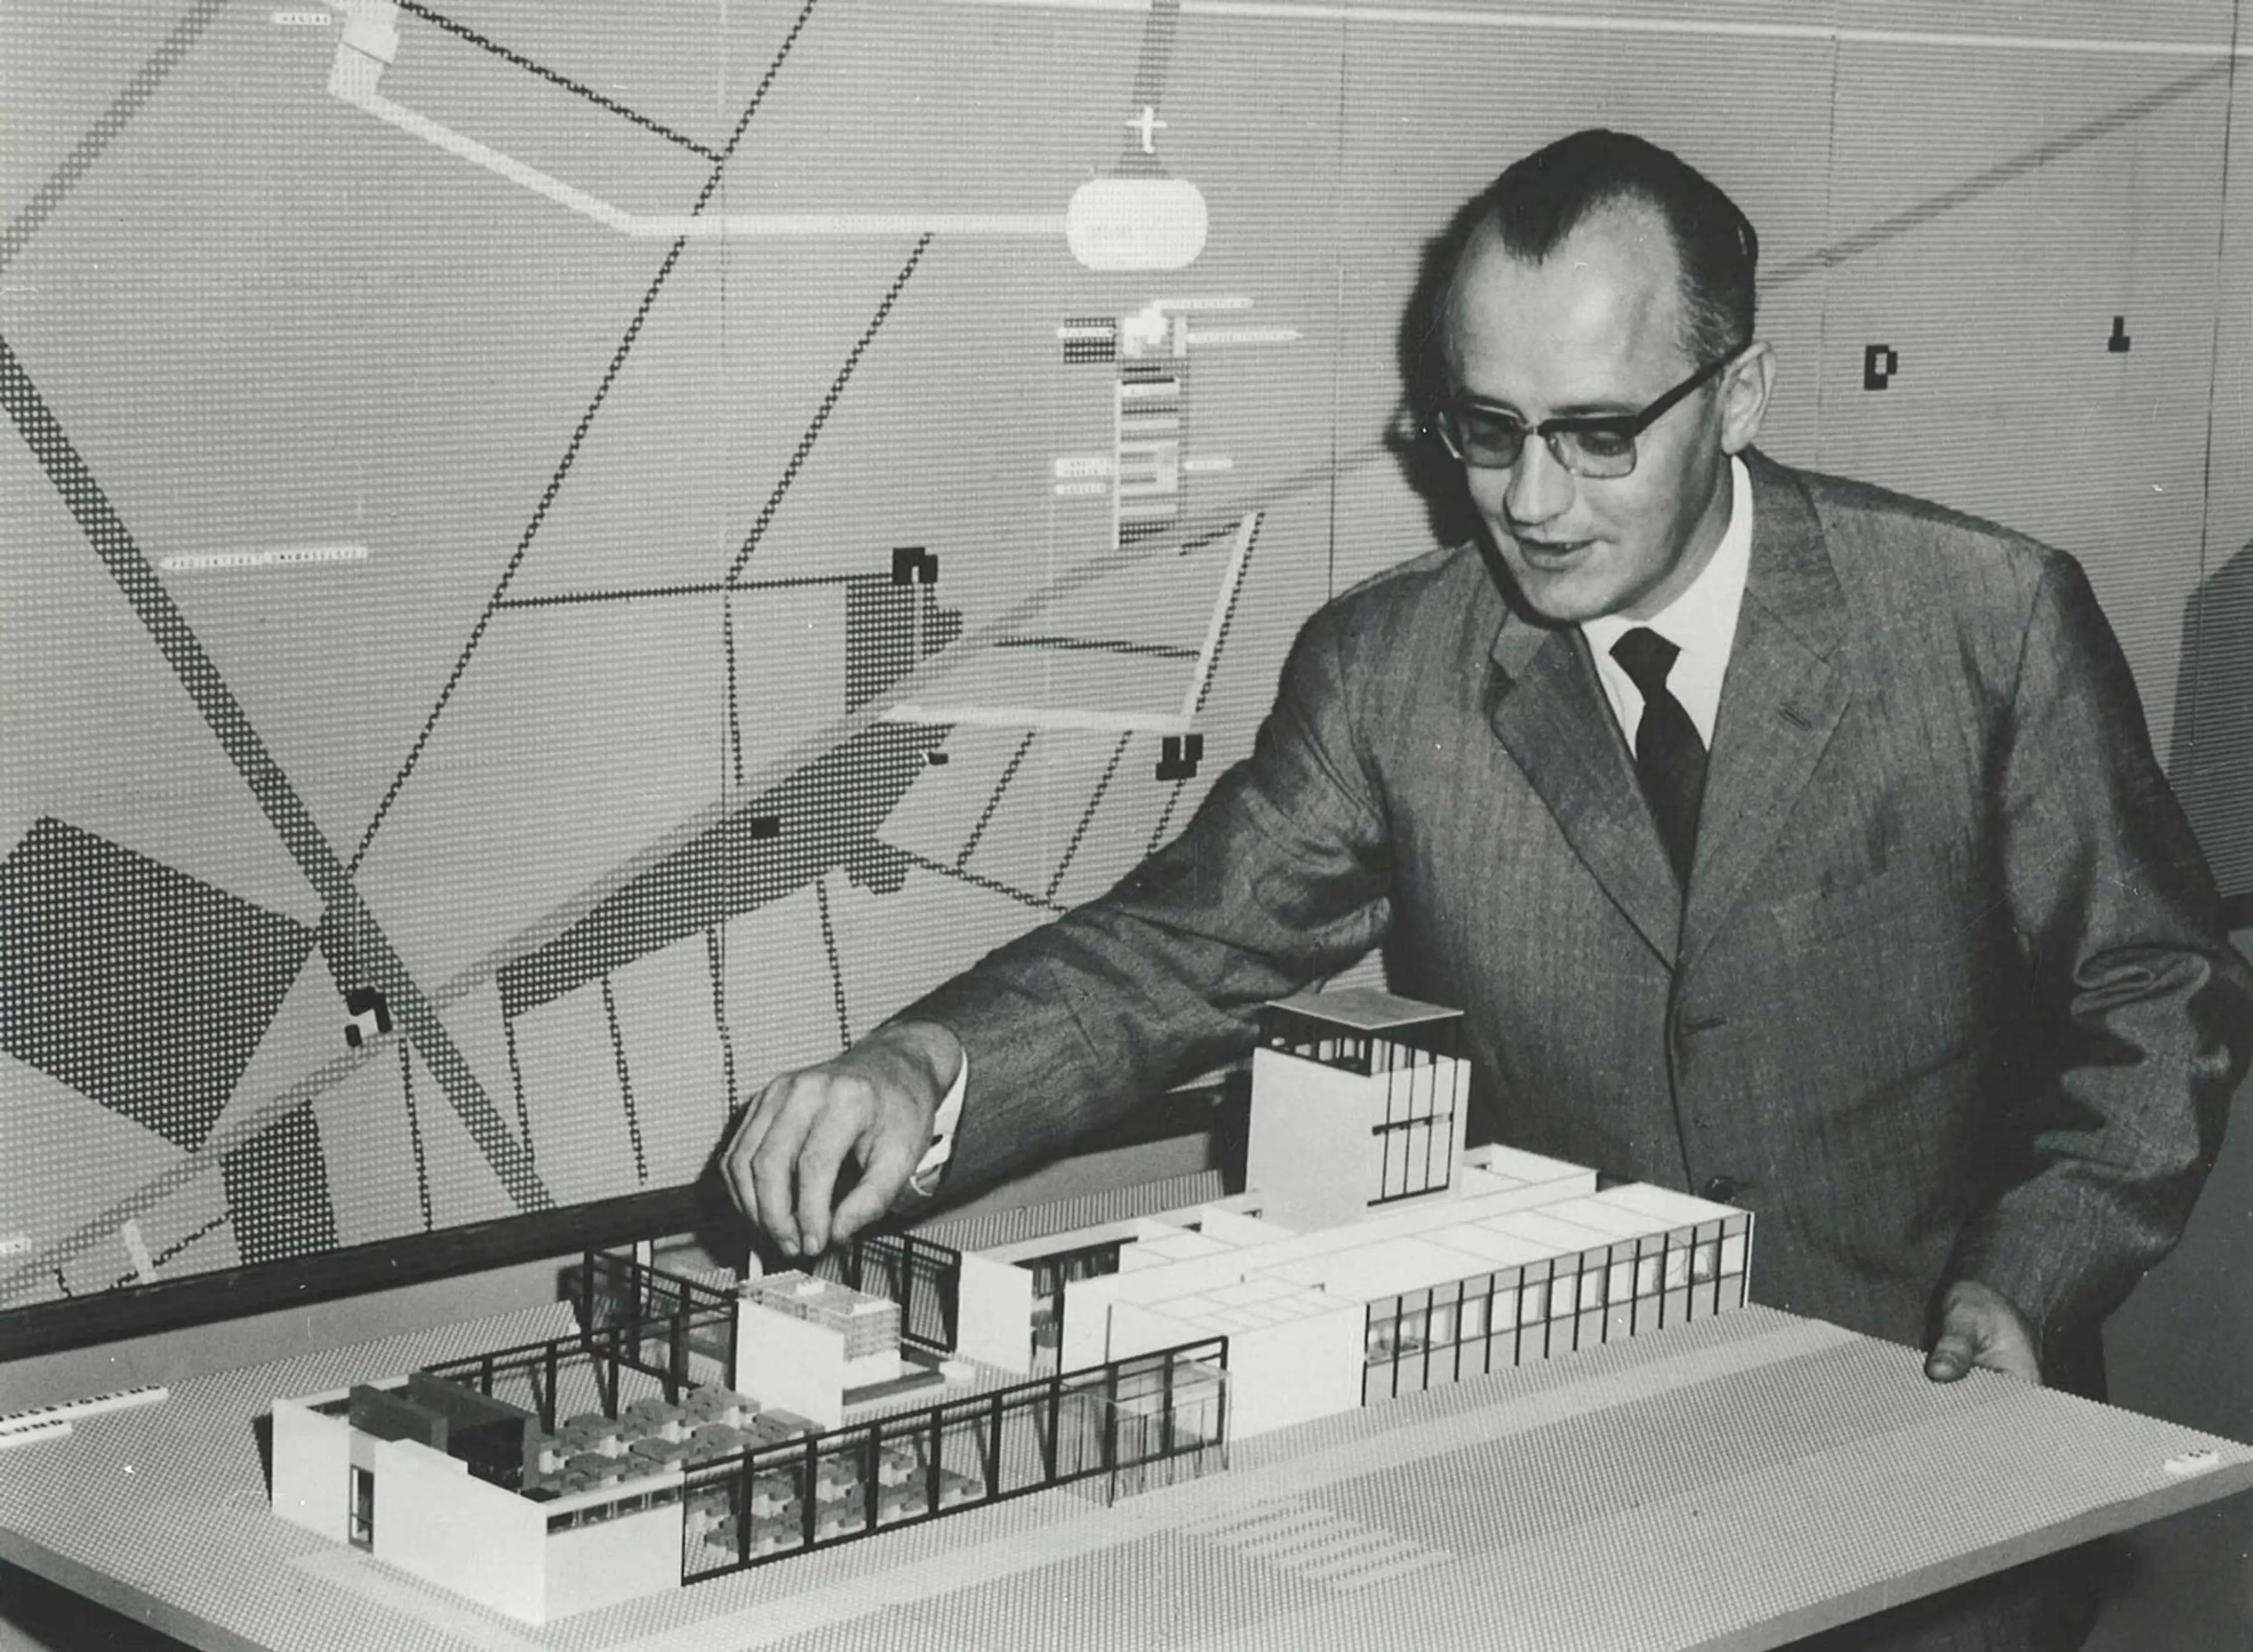 LEGO owner Godtfred Kirk Christiansen with a brick built model of an airport terminal